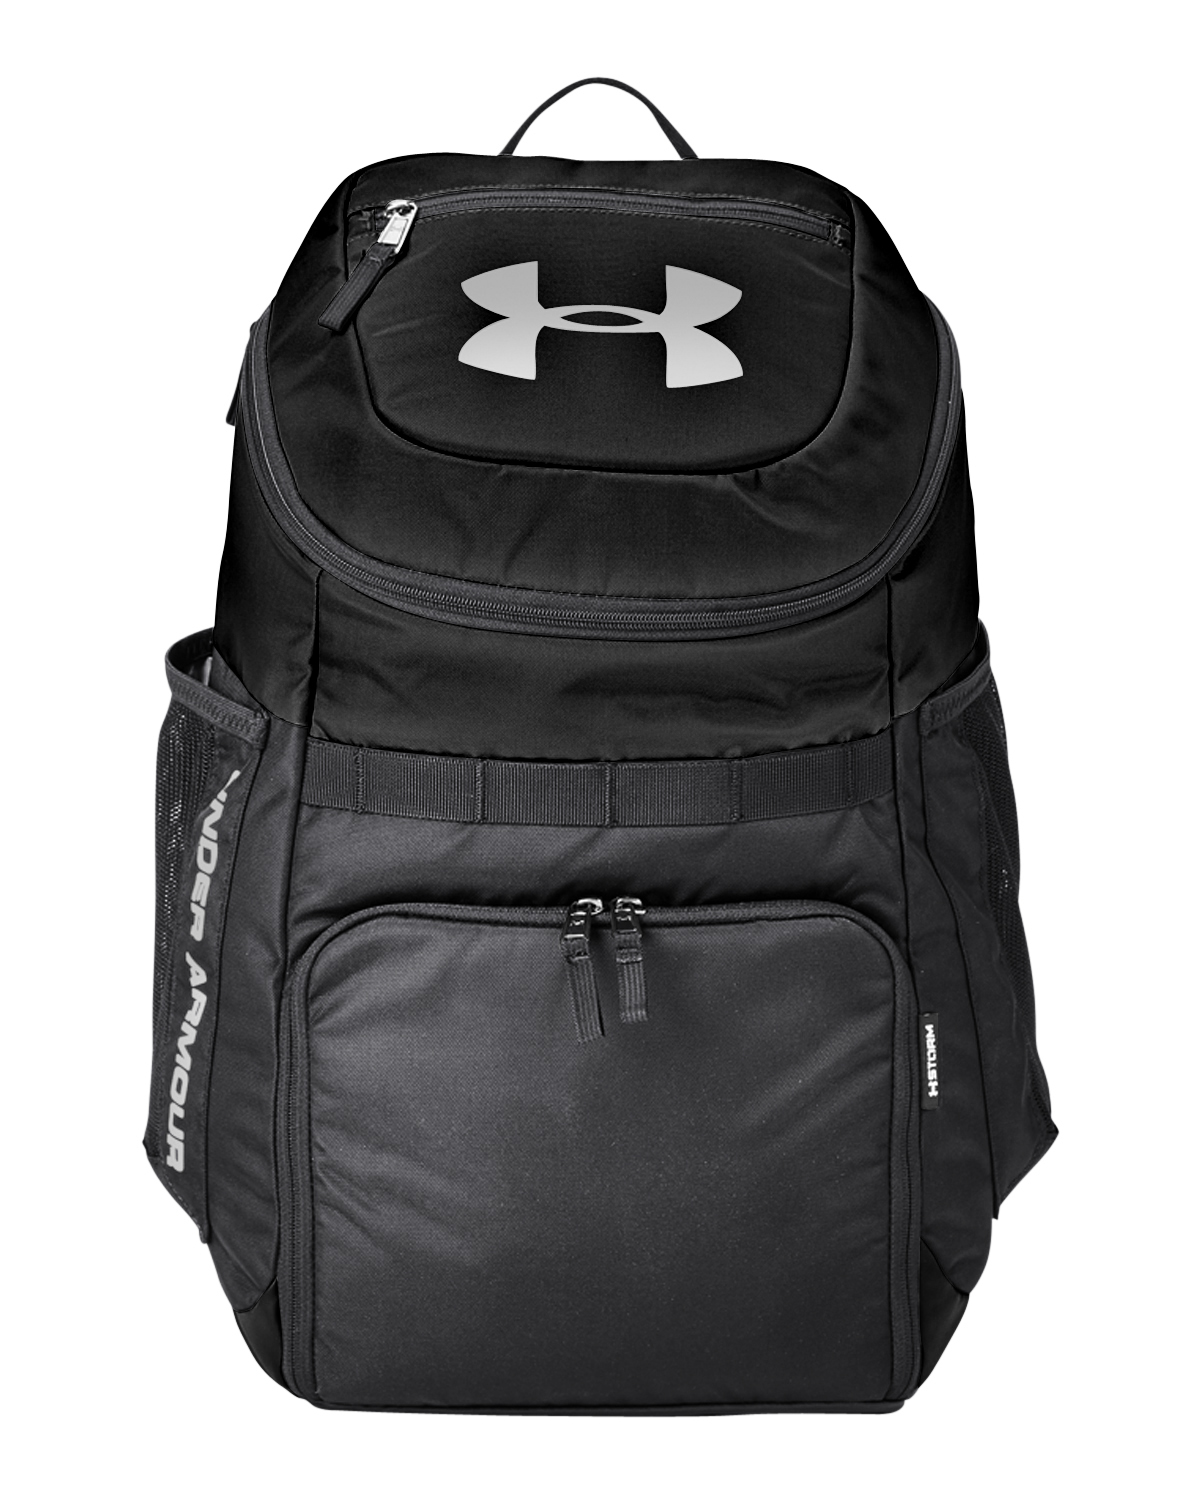 Under Armour 1309353 - UA Undeniable Backpack